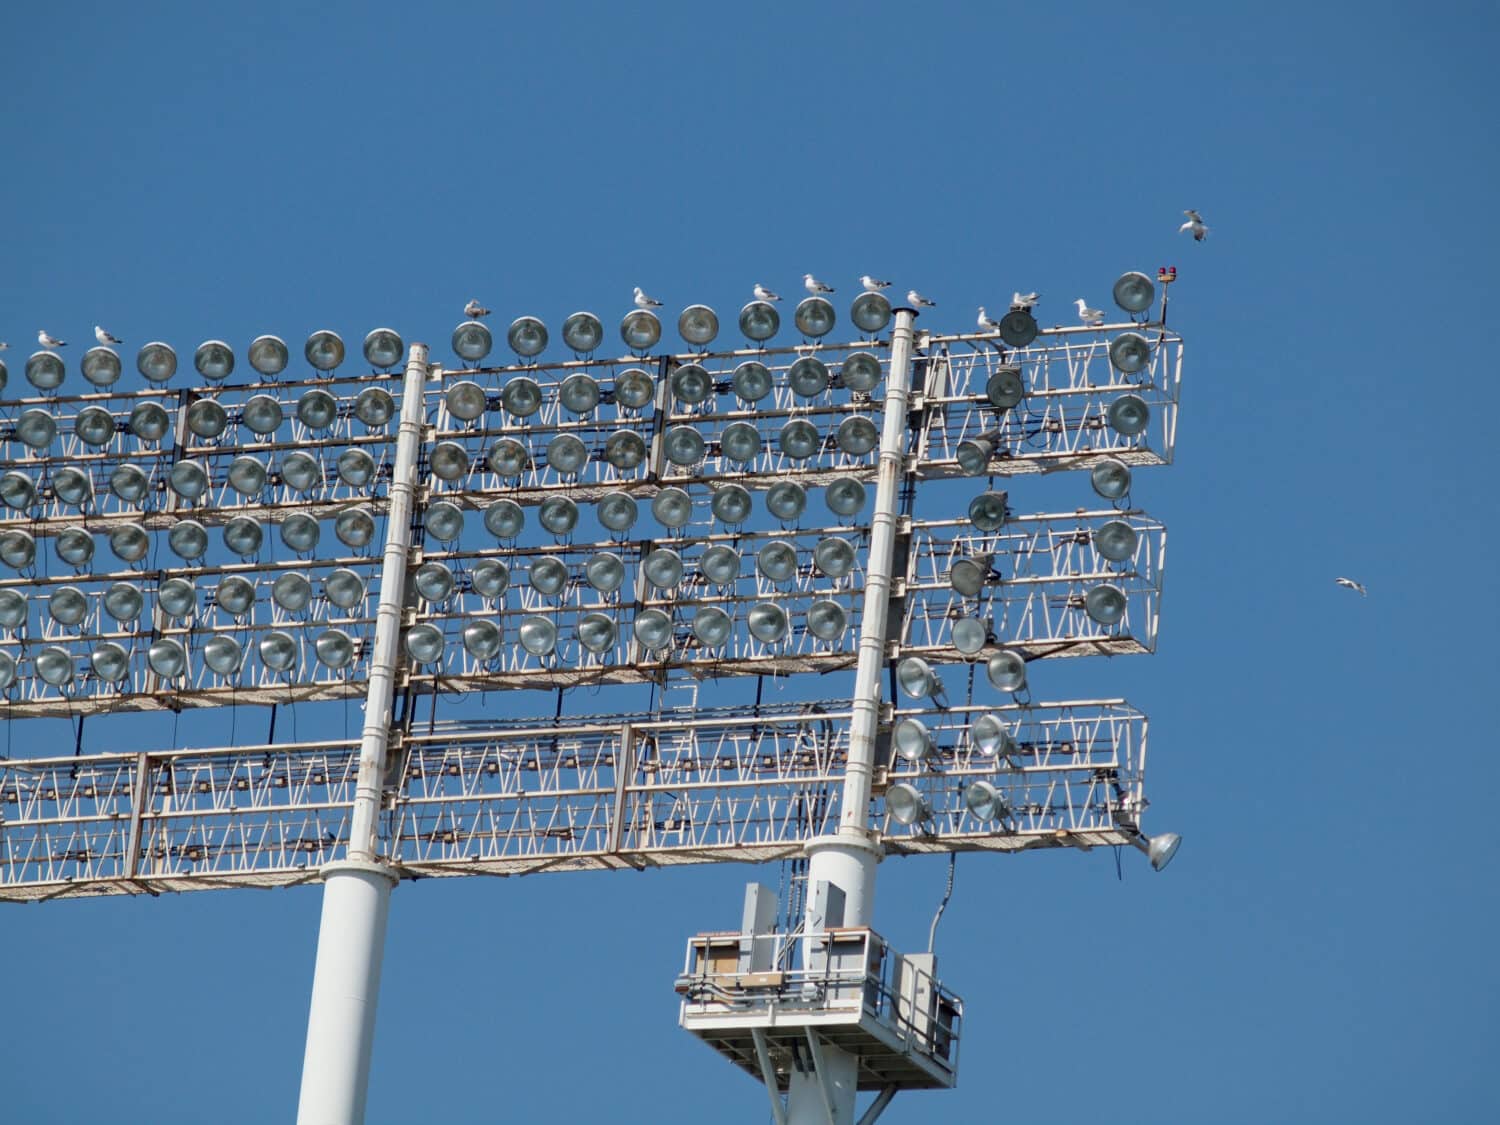 Seagull Birds rest and fly around Stadium-style lights, taken at Oakland Coliseum looking forward, clear blue sky background, during the daytime so the lights are off.